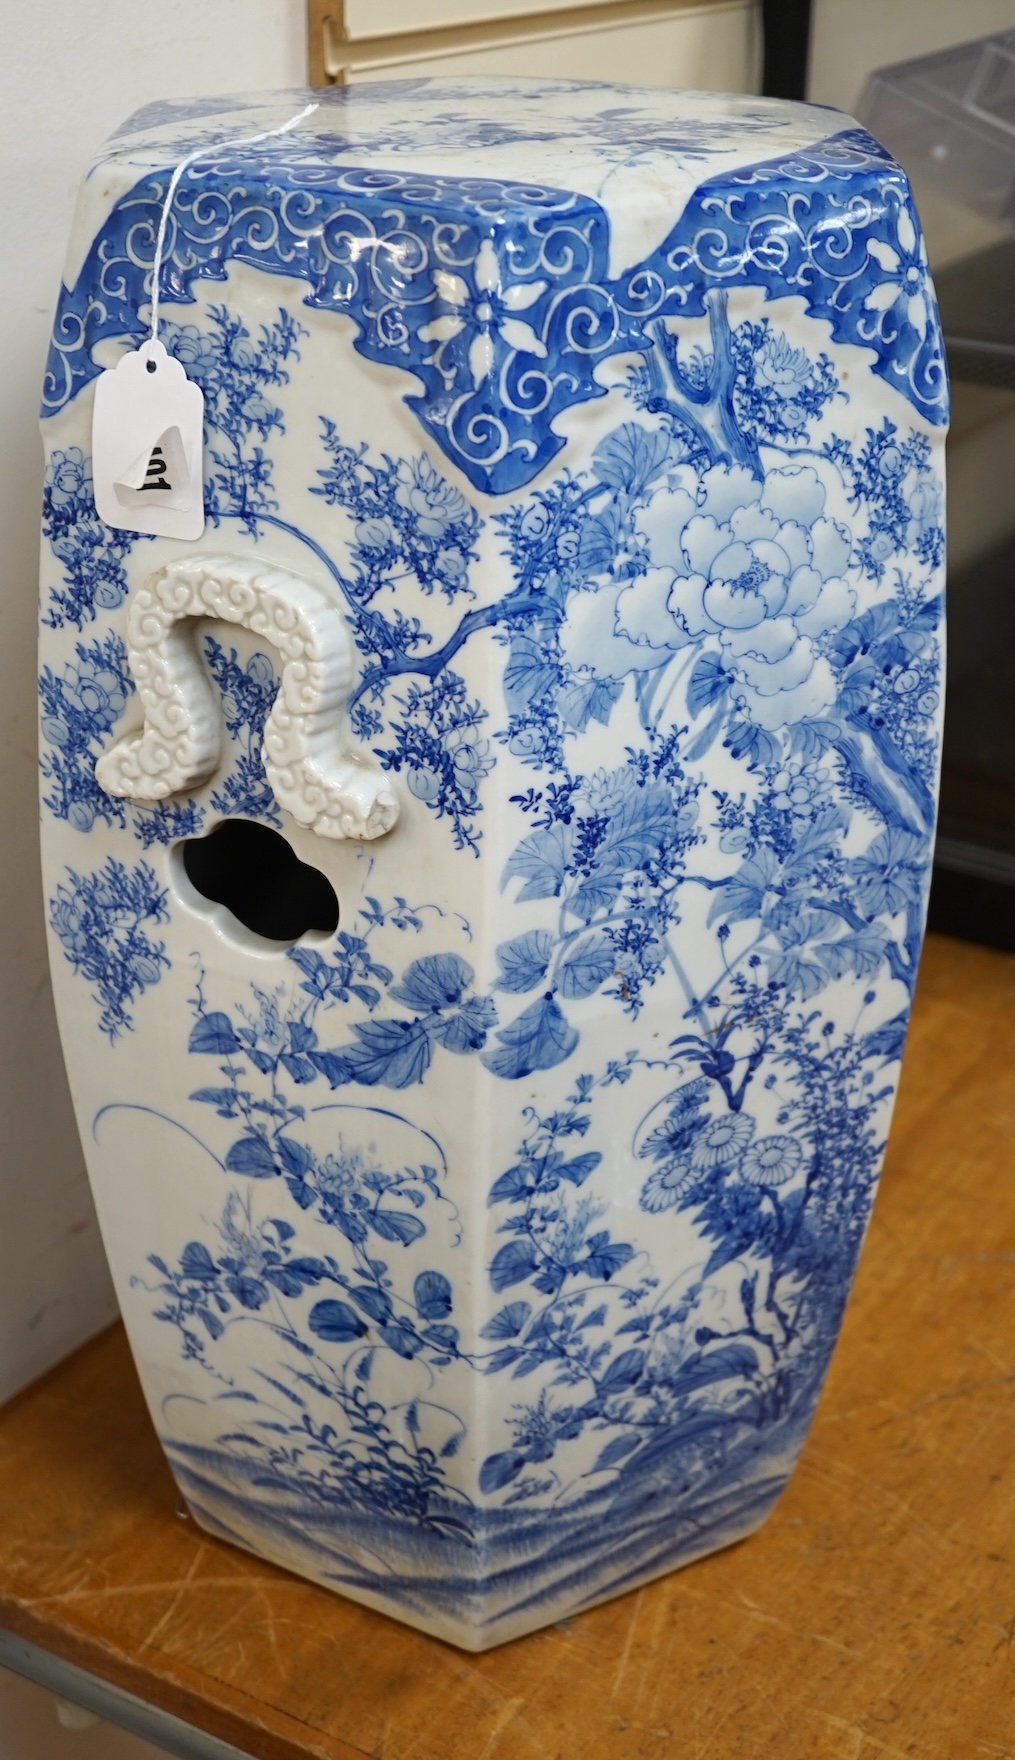 An early 20th century Japanese hexagonal blue and white porcelain garden seat, 50cm high. Condition- fair, has hairline crack